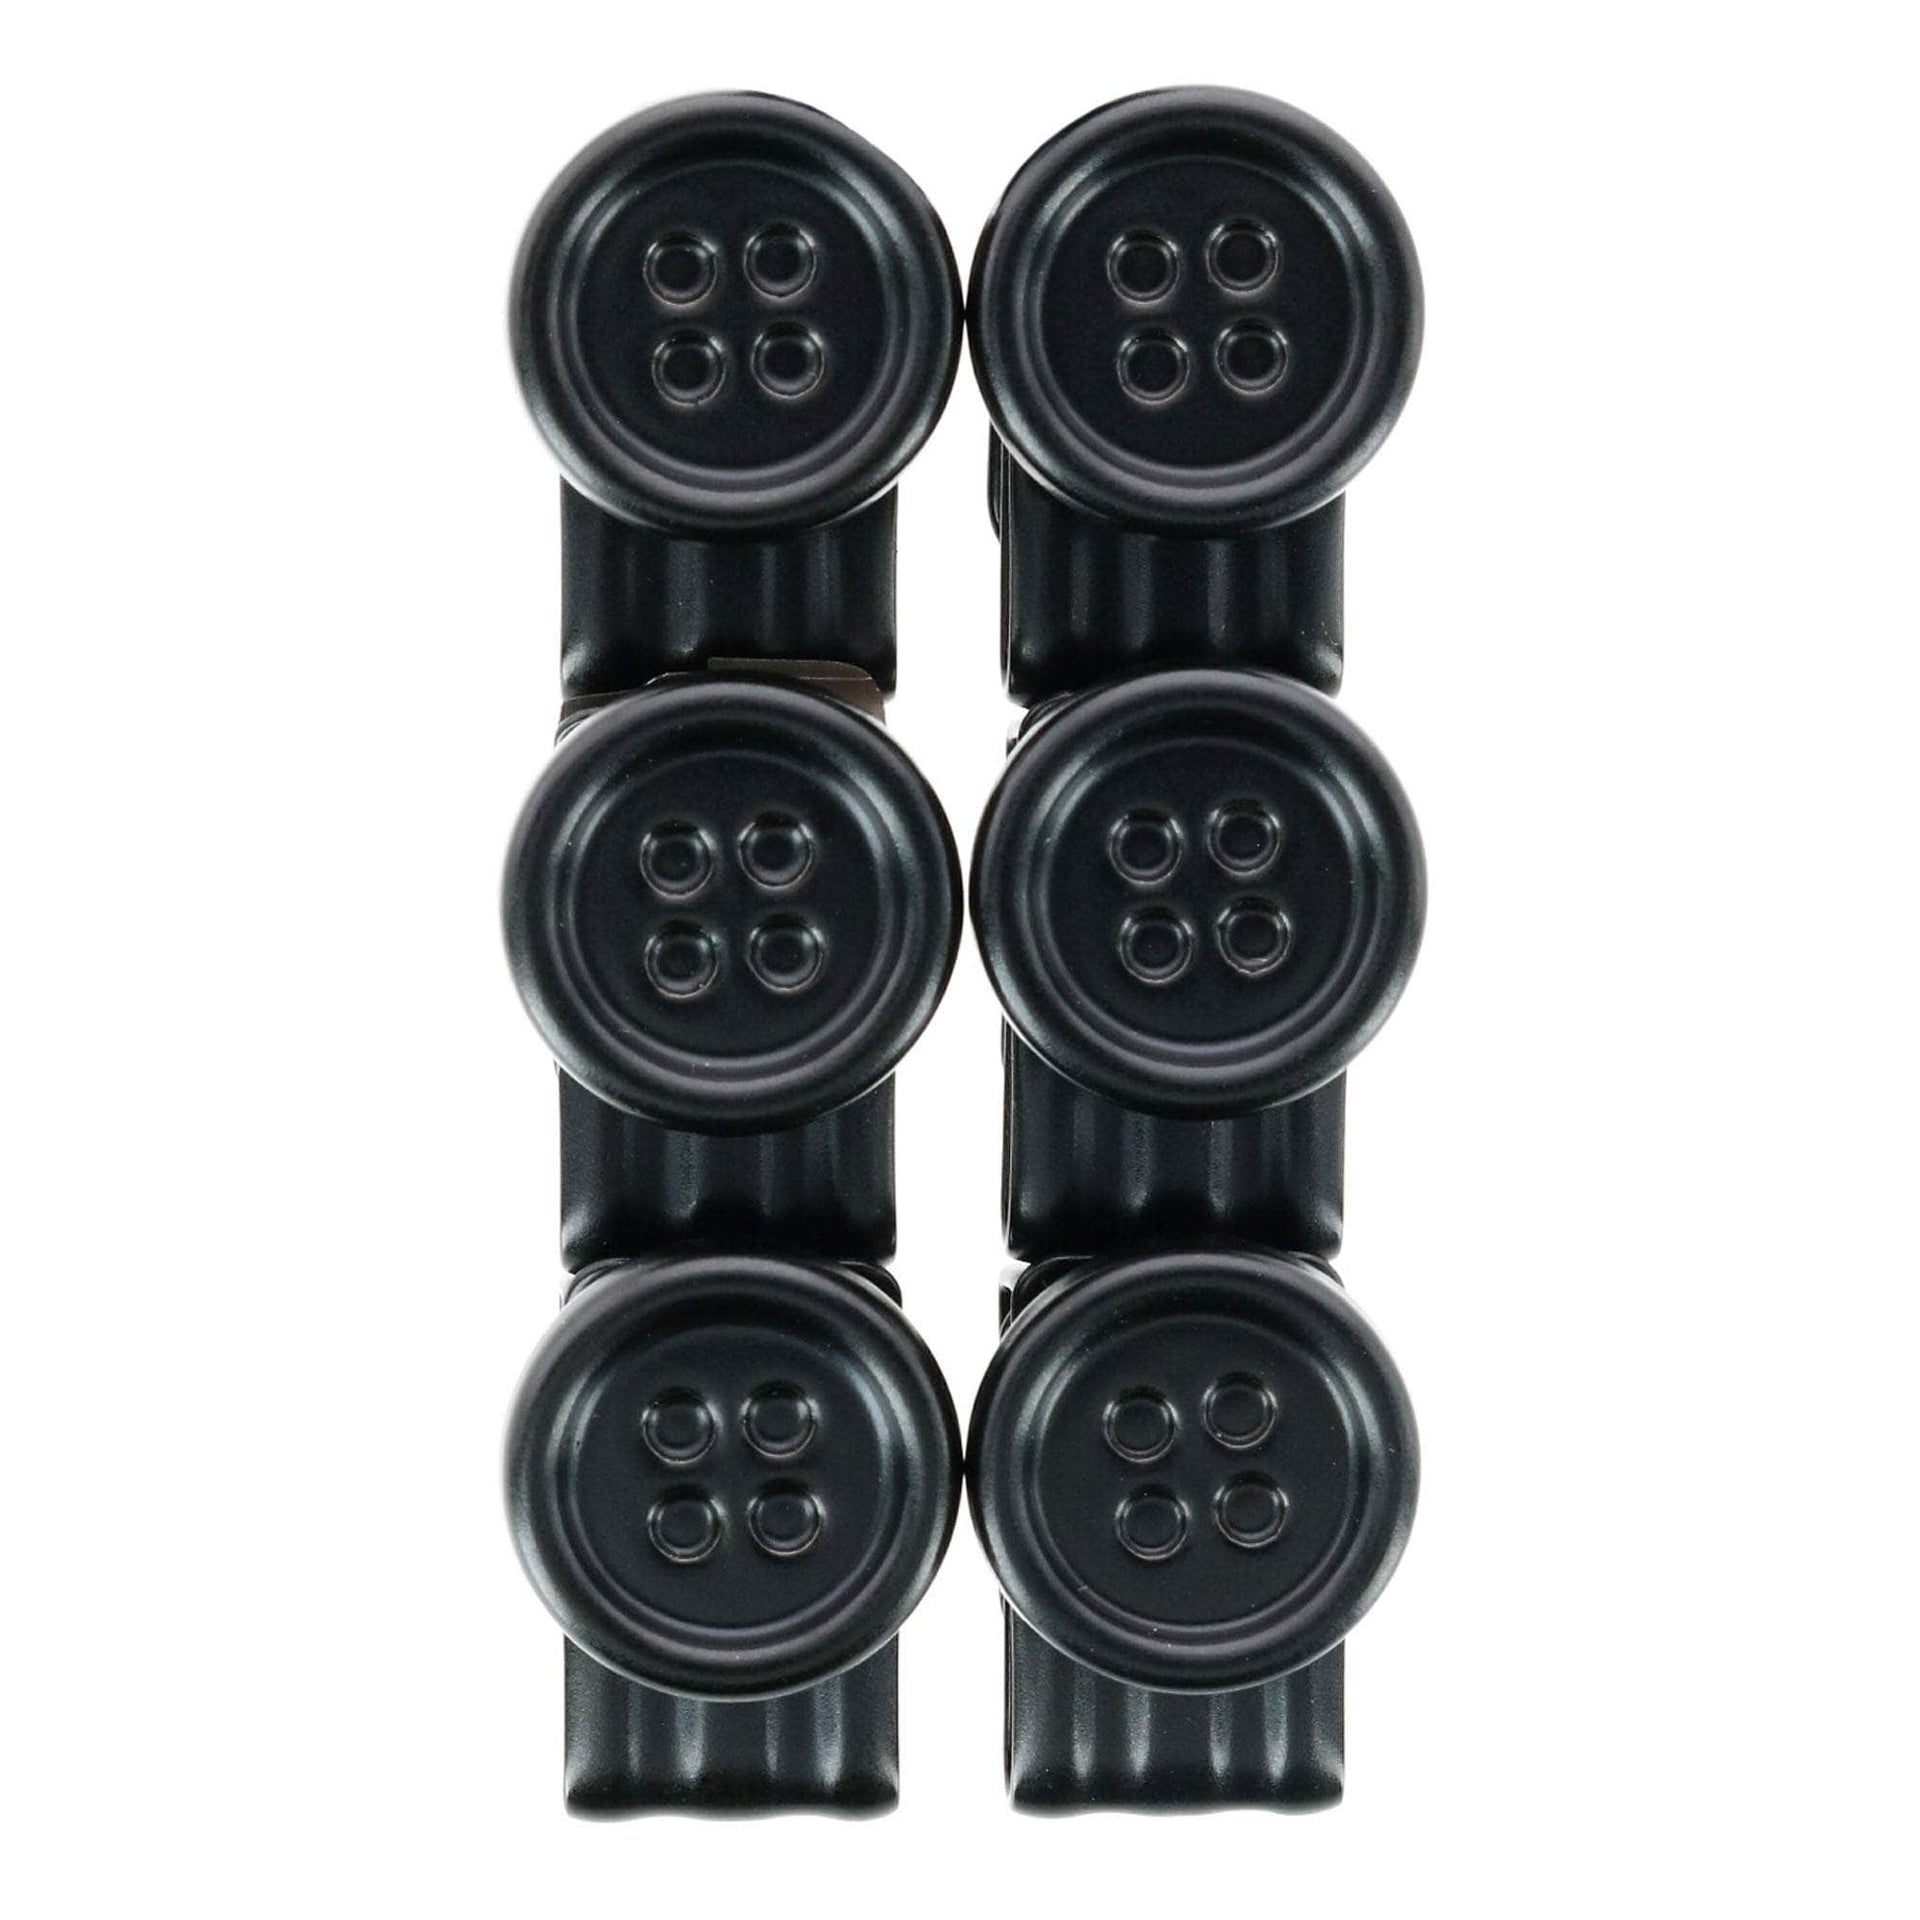 Strong CLIP ON Buttons Black colored Metal NO-SEW BUTTONS SIX in a Package.